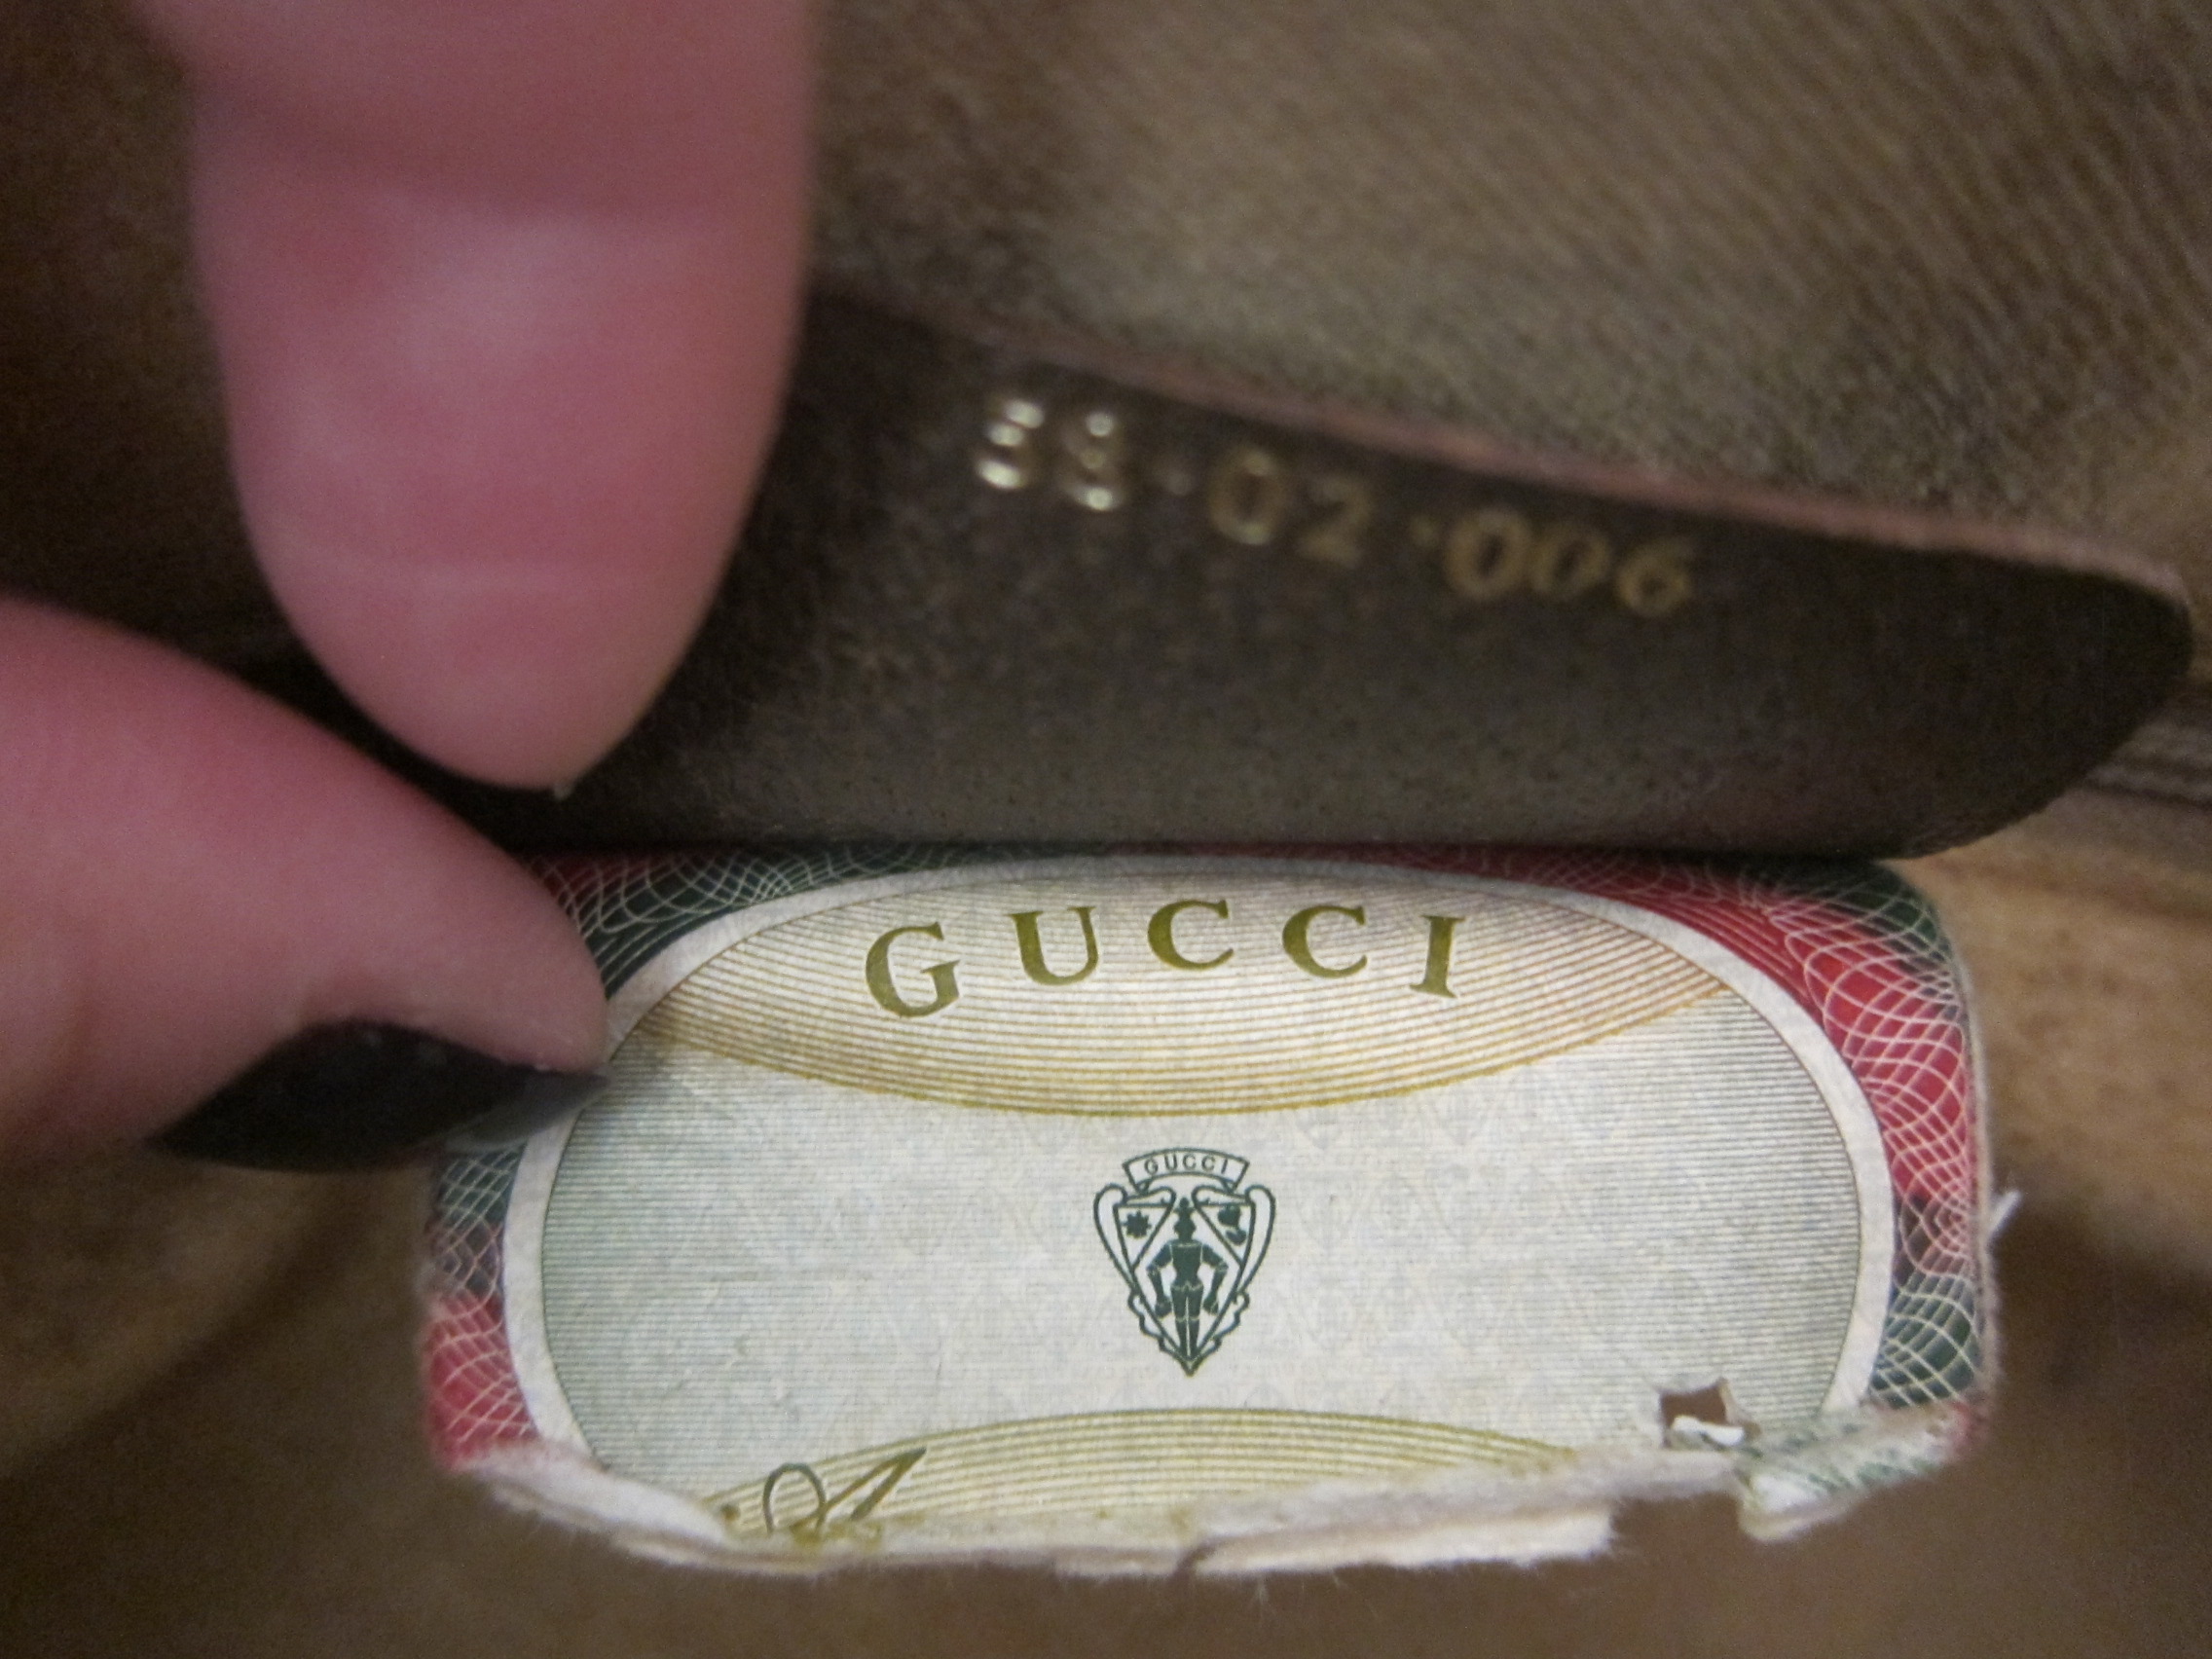 Verify Gucci Wallet Serial Number | Confederated Tribes of the Umatilla Indian Reservation